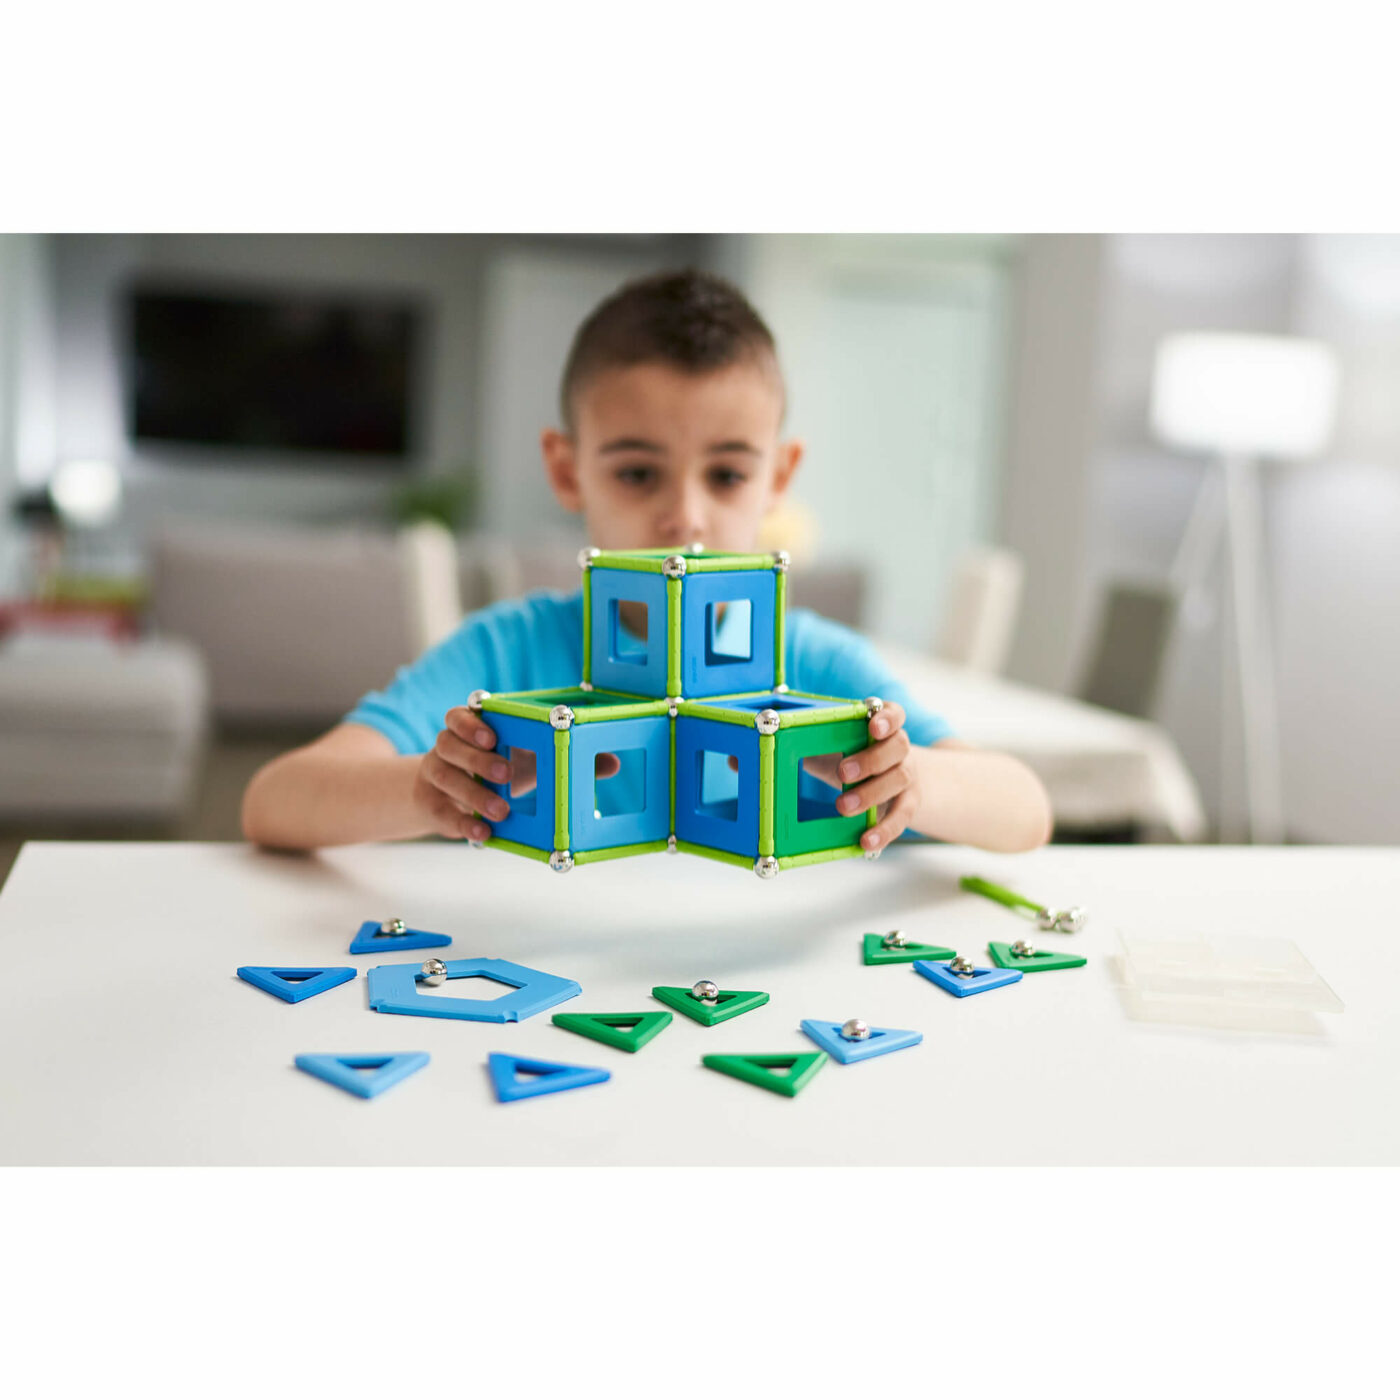 Geomag-Classic-Classic-Panels-Item-473-Product-Images-Lifestyle-Boy-admiring-the-model-that-he-just-finished-to-build